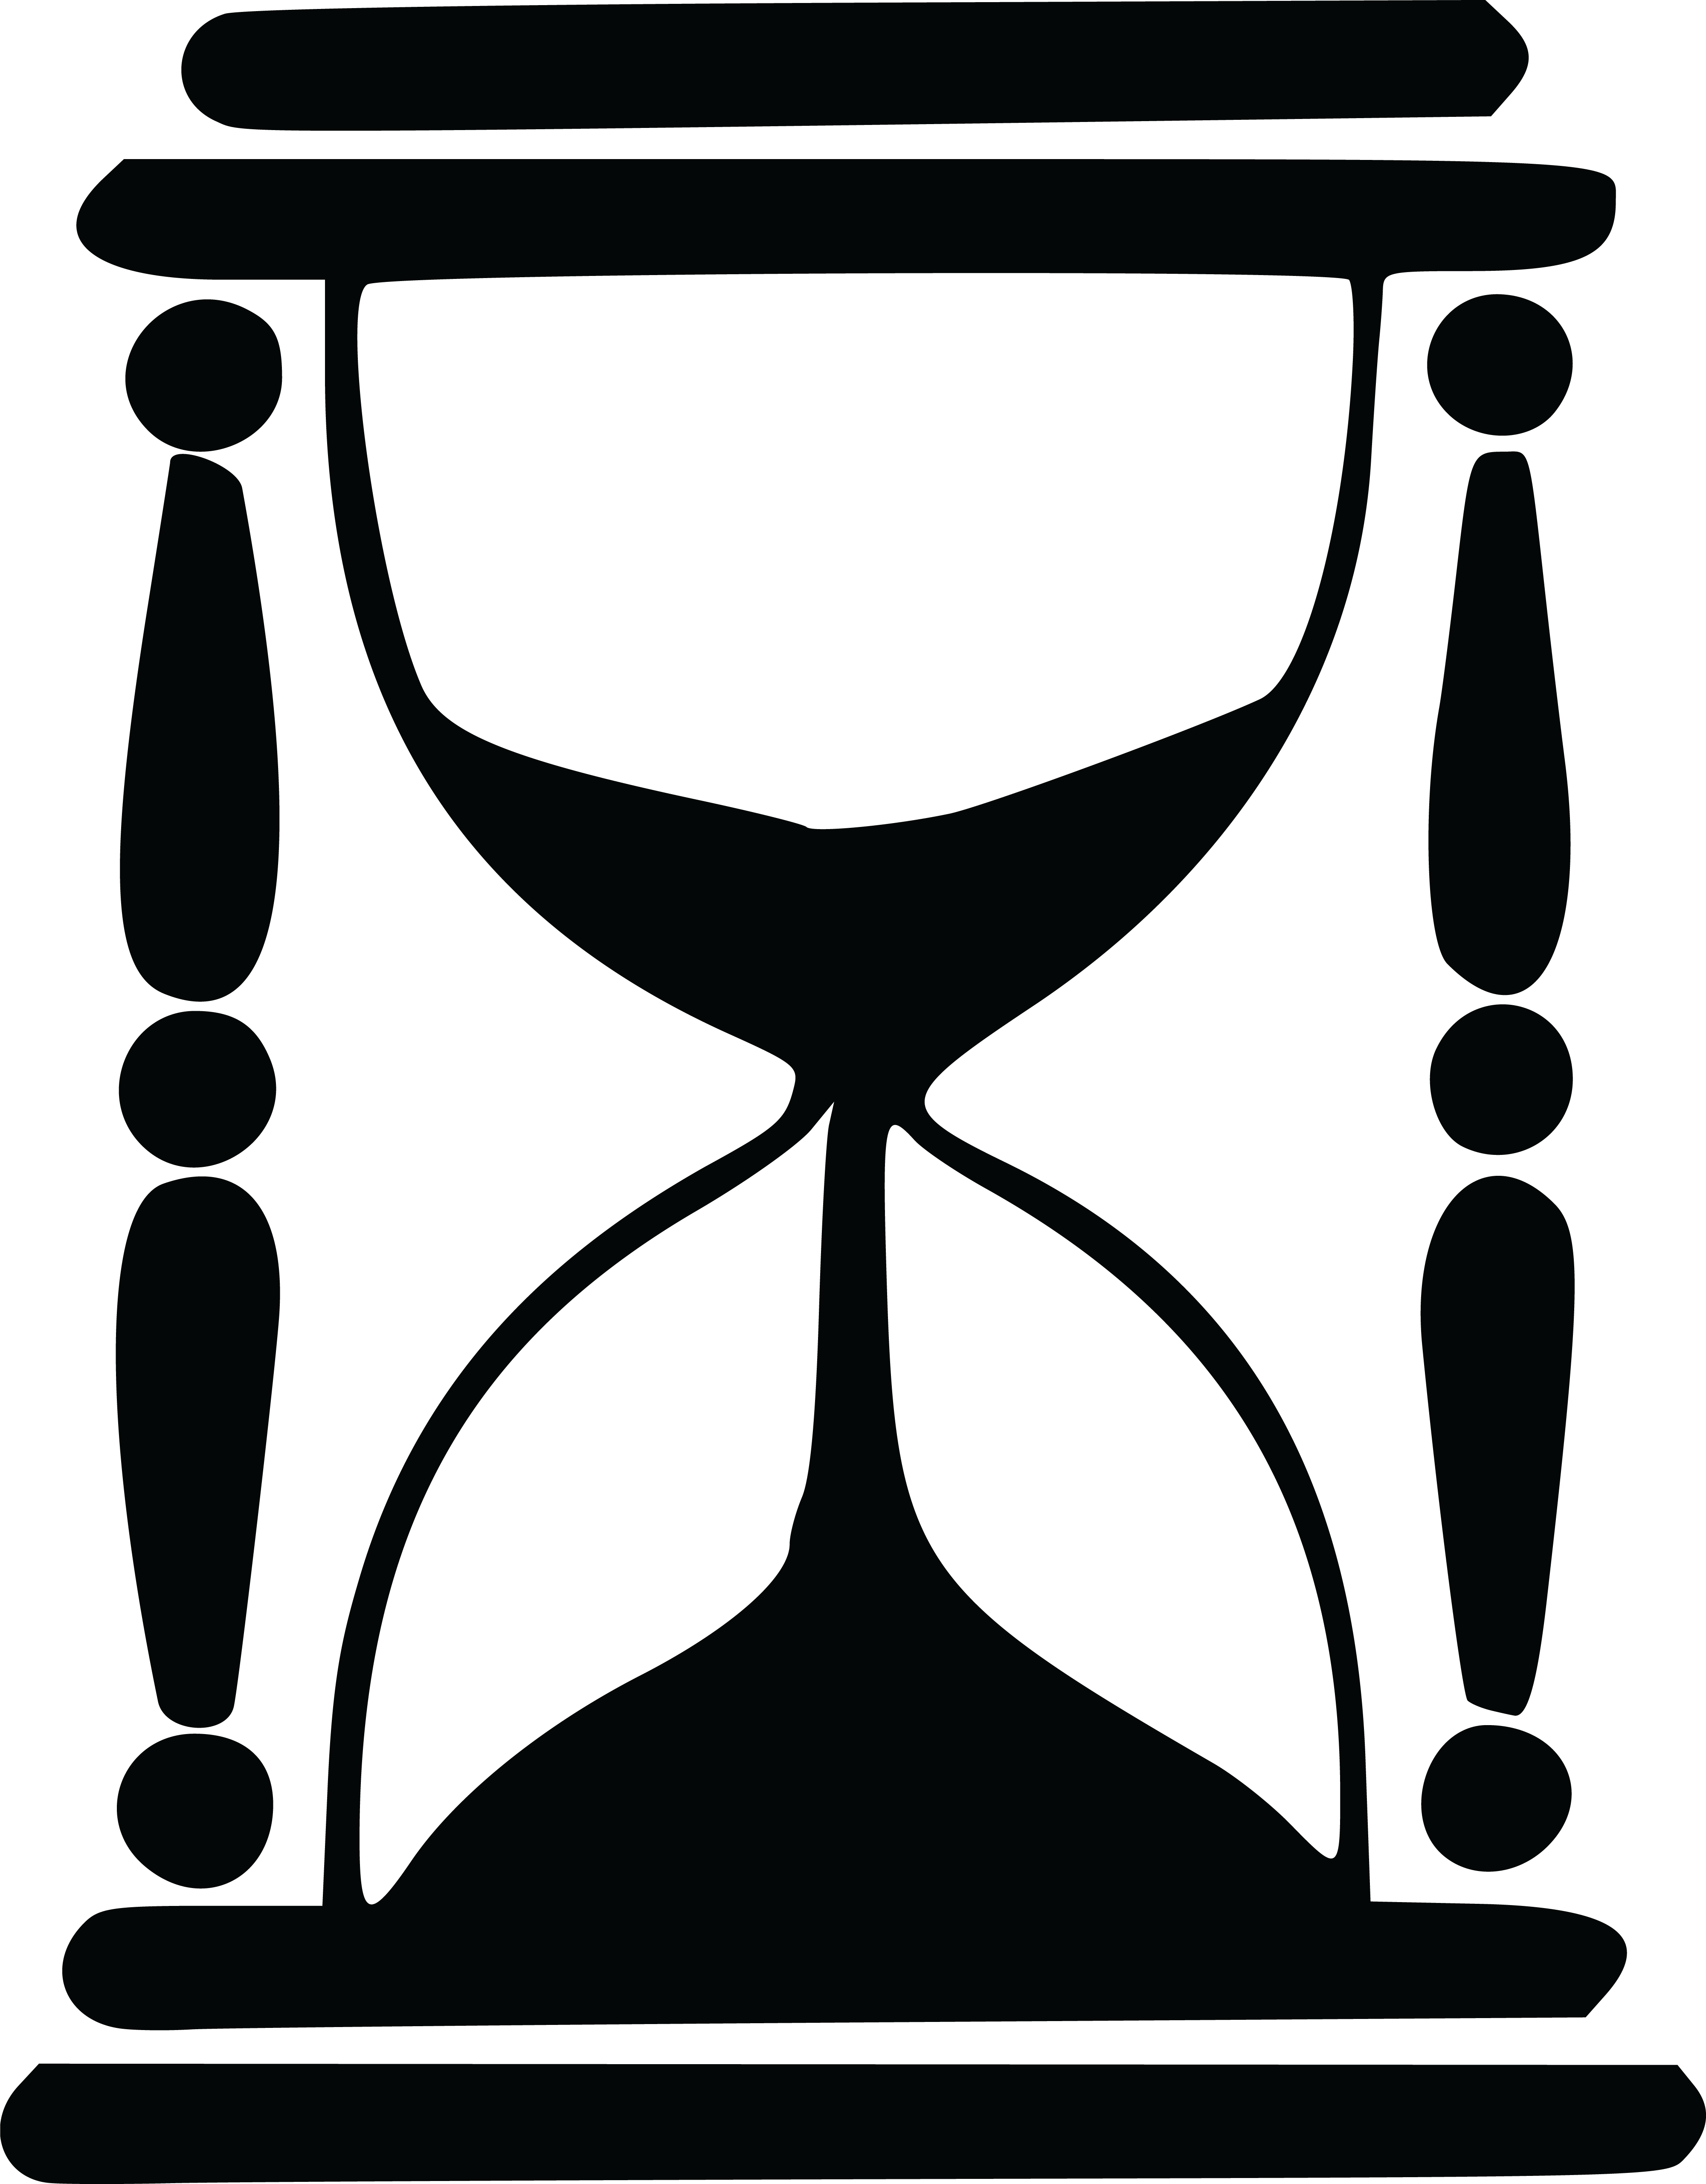 Free Clipart Of An Hourglass - Hourglass Silhouette (4000x5121)